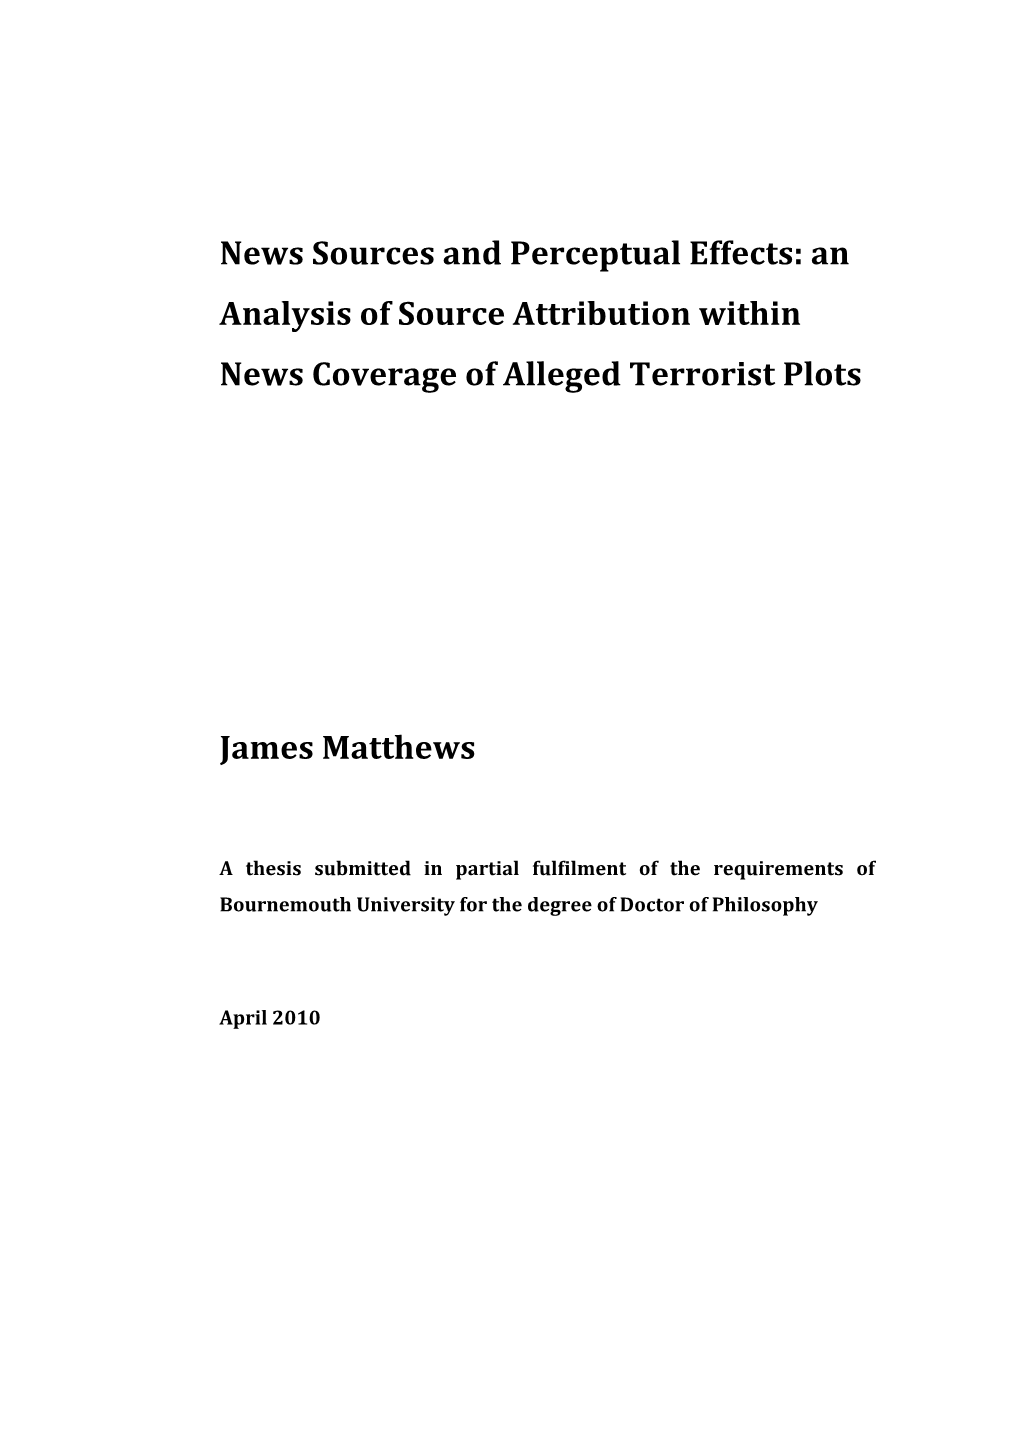 News Sources and Perceptual Effects: an Analysis of Source Attribution Within News Coverage of Alleged Terrorist Plots